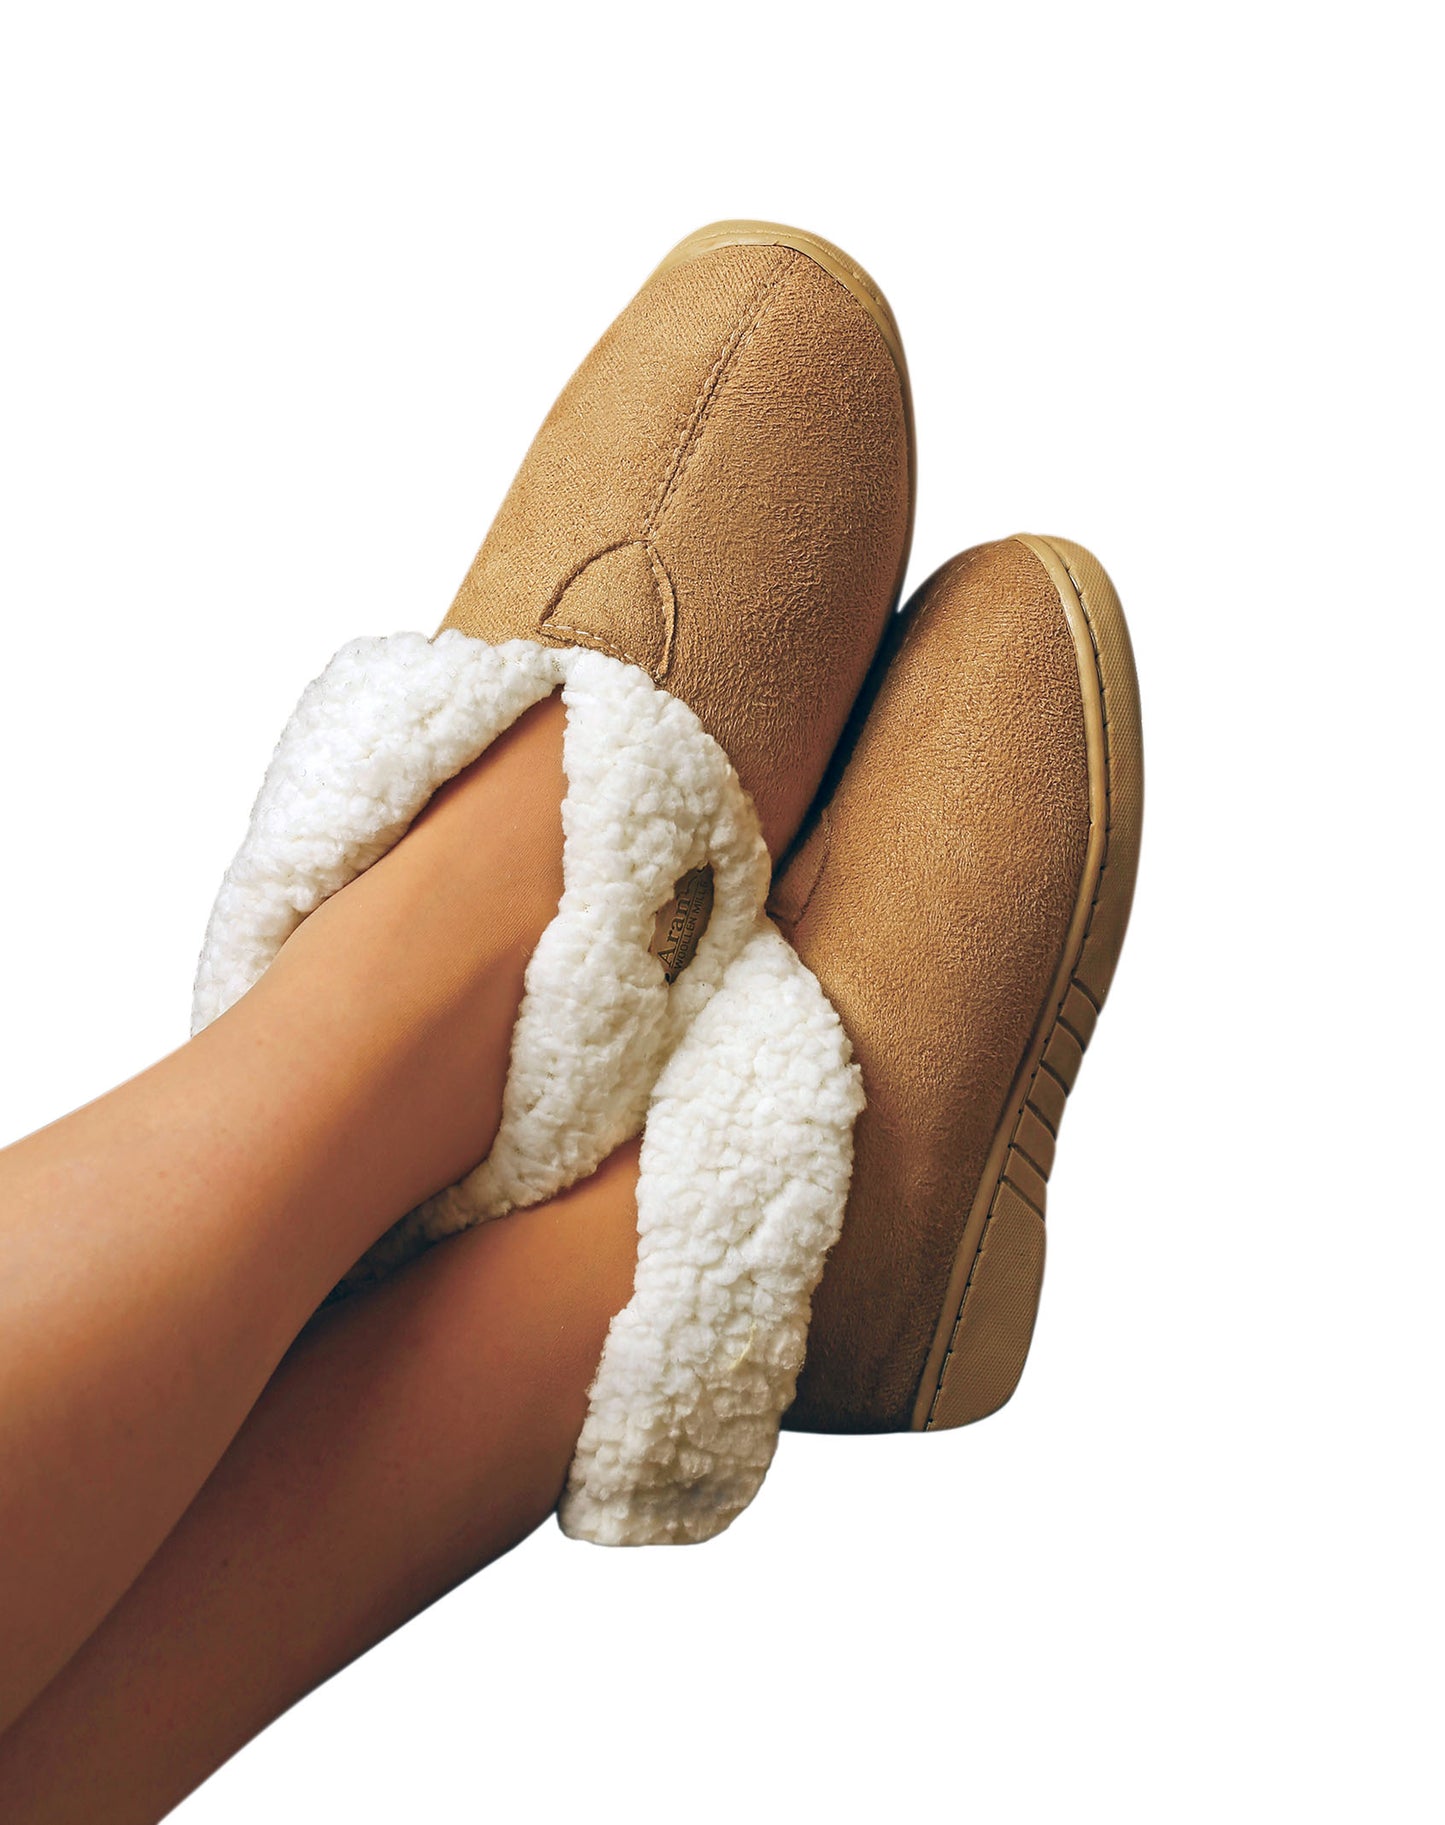 Irish Faux Suede Adult Slippers - Warm Toast